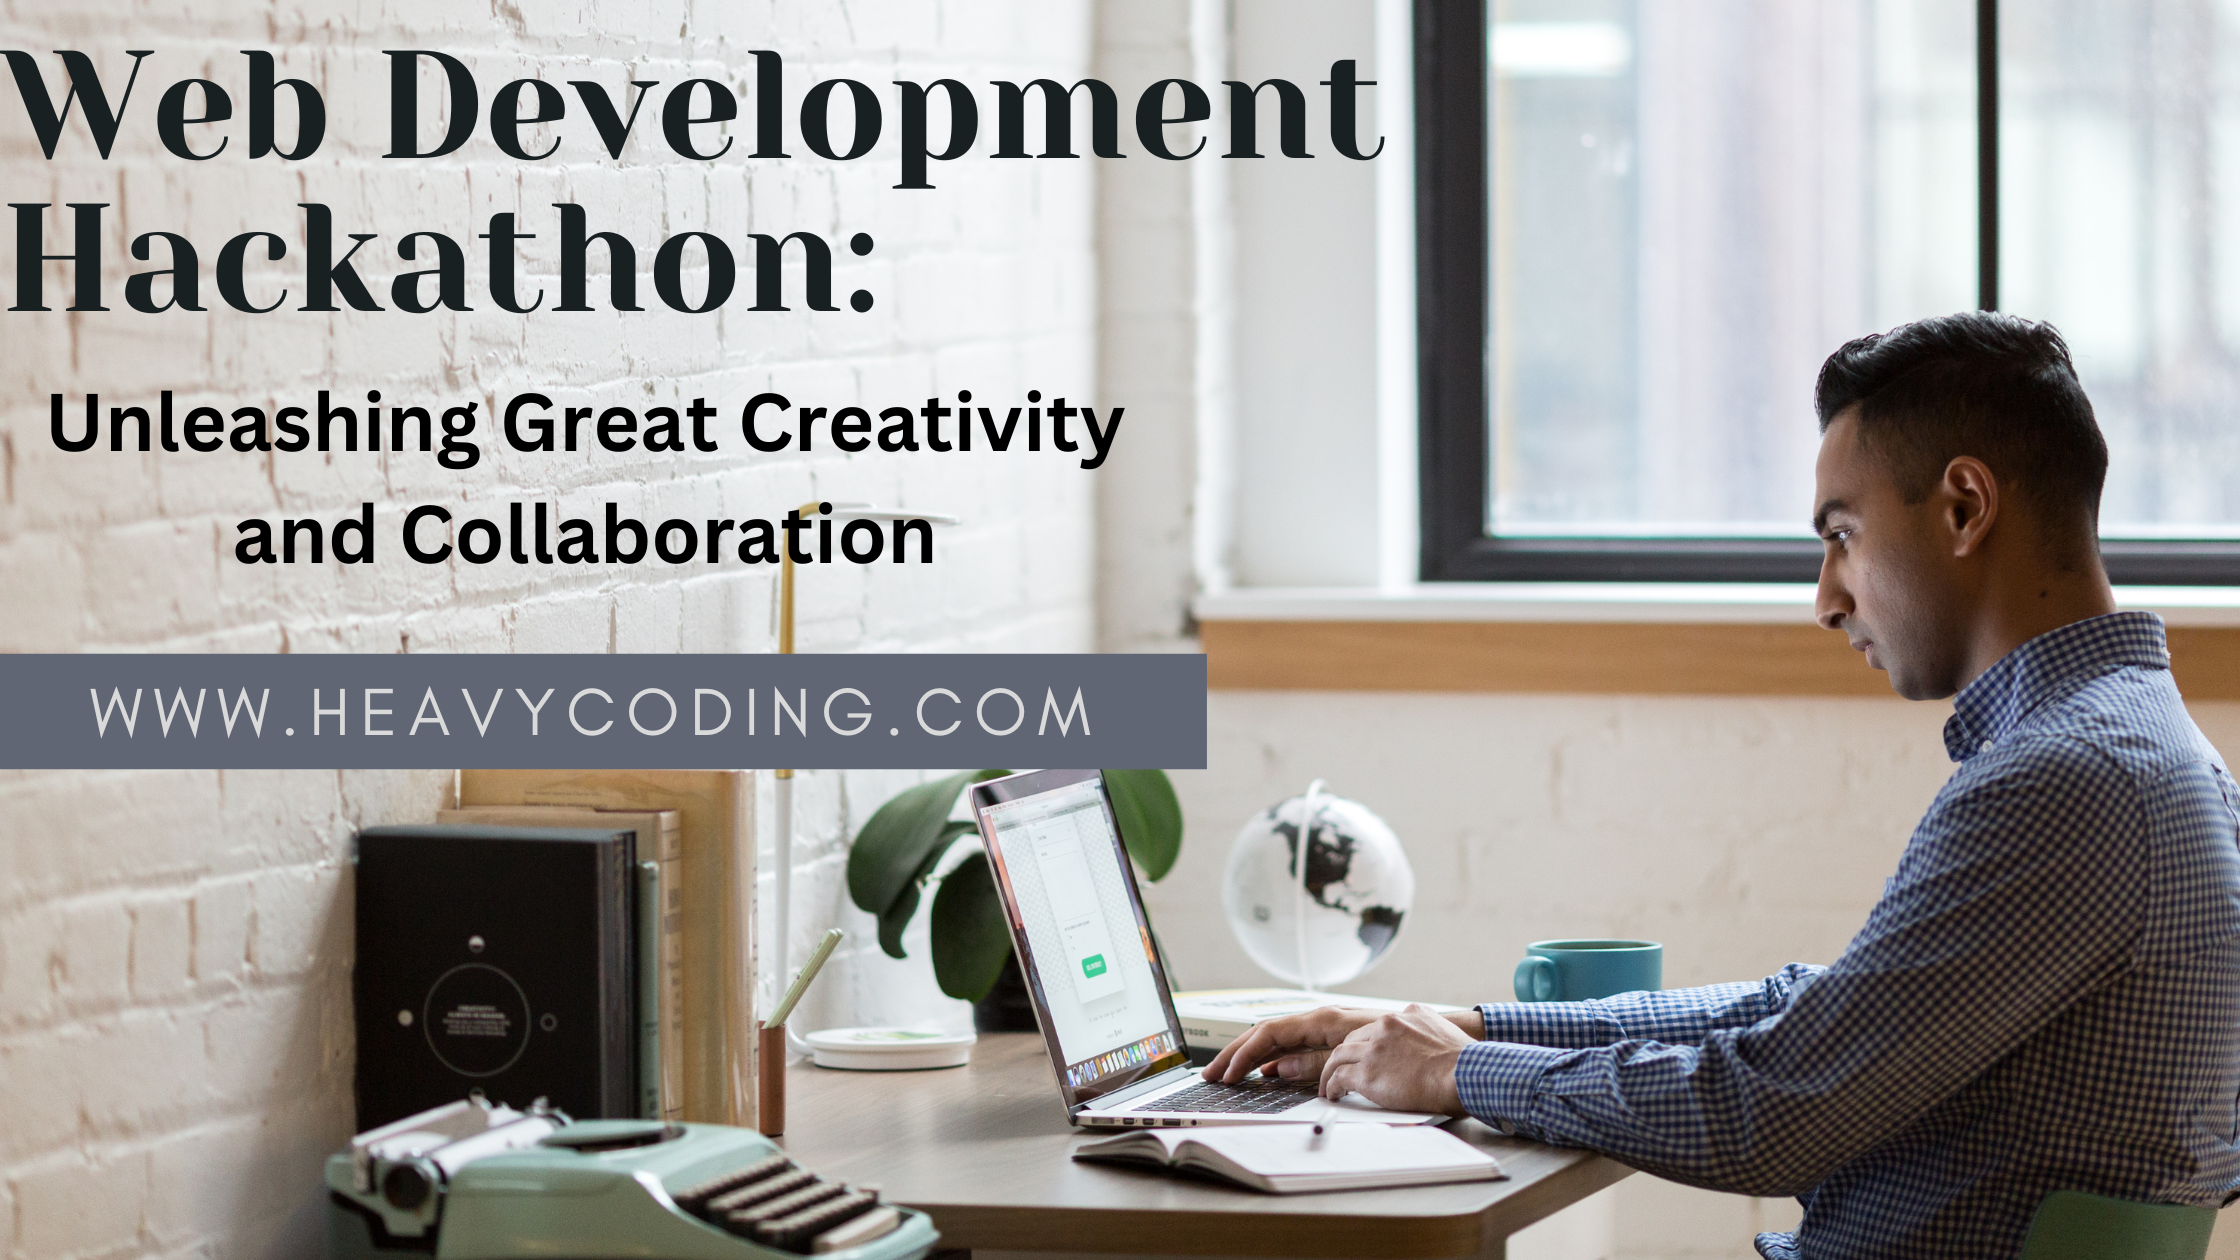 You are currently viewing Web Development Hackathon: Unleashing Great Creativity and Collaboration